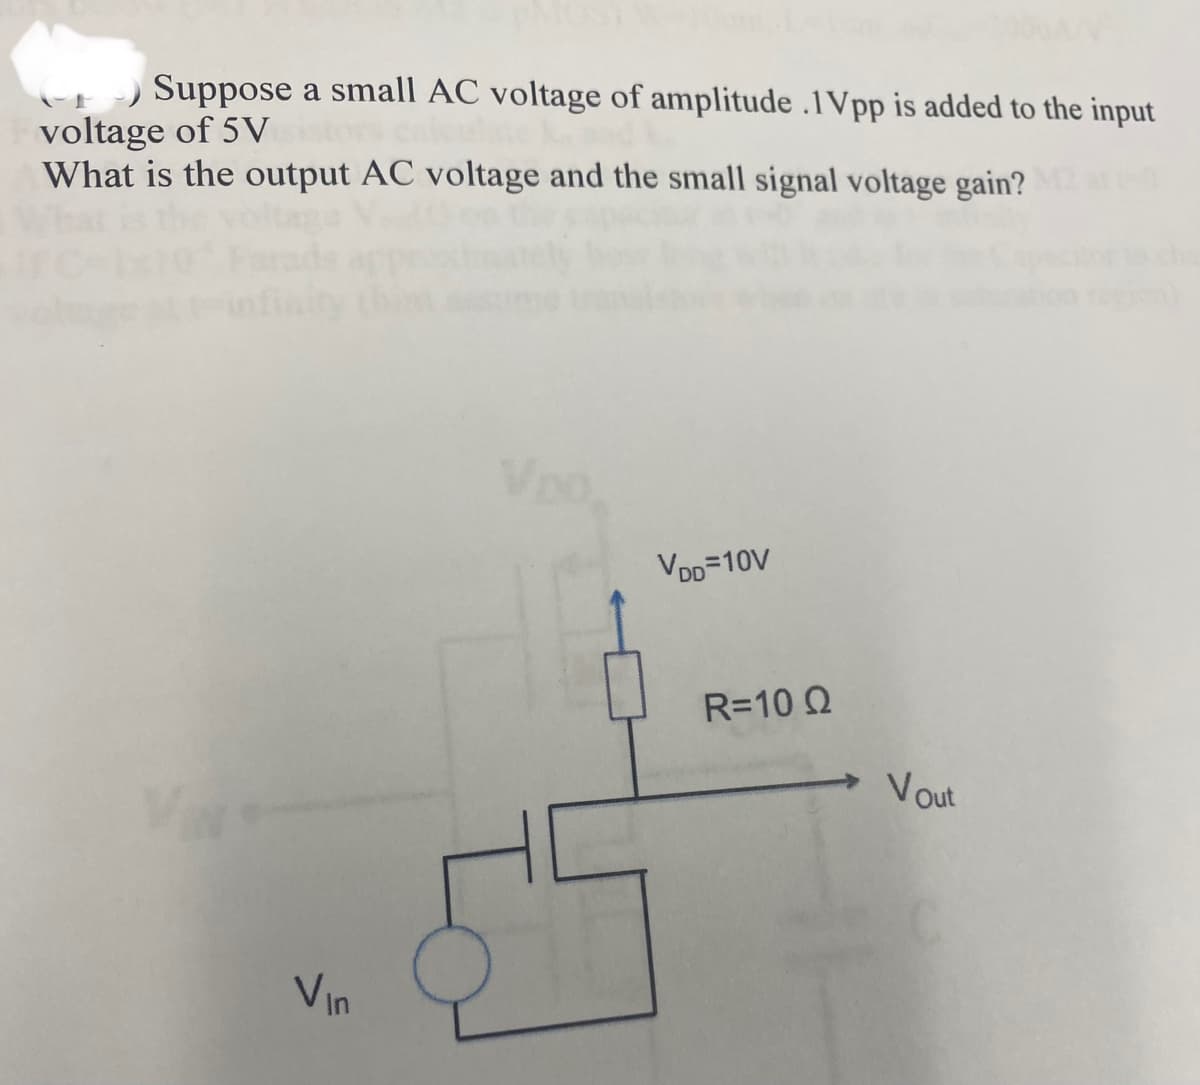 Suppose a small AC voltage of amplitude .1Vpp is added to the input
voltage of 5V
What is the output AC voltage and the small signal voltage gain?
Vin
Lo
VDD=10V
R=10 Q2
Vout